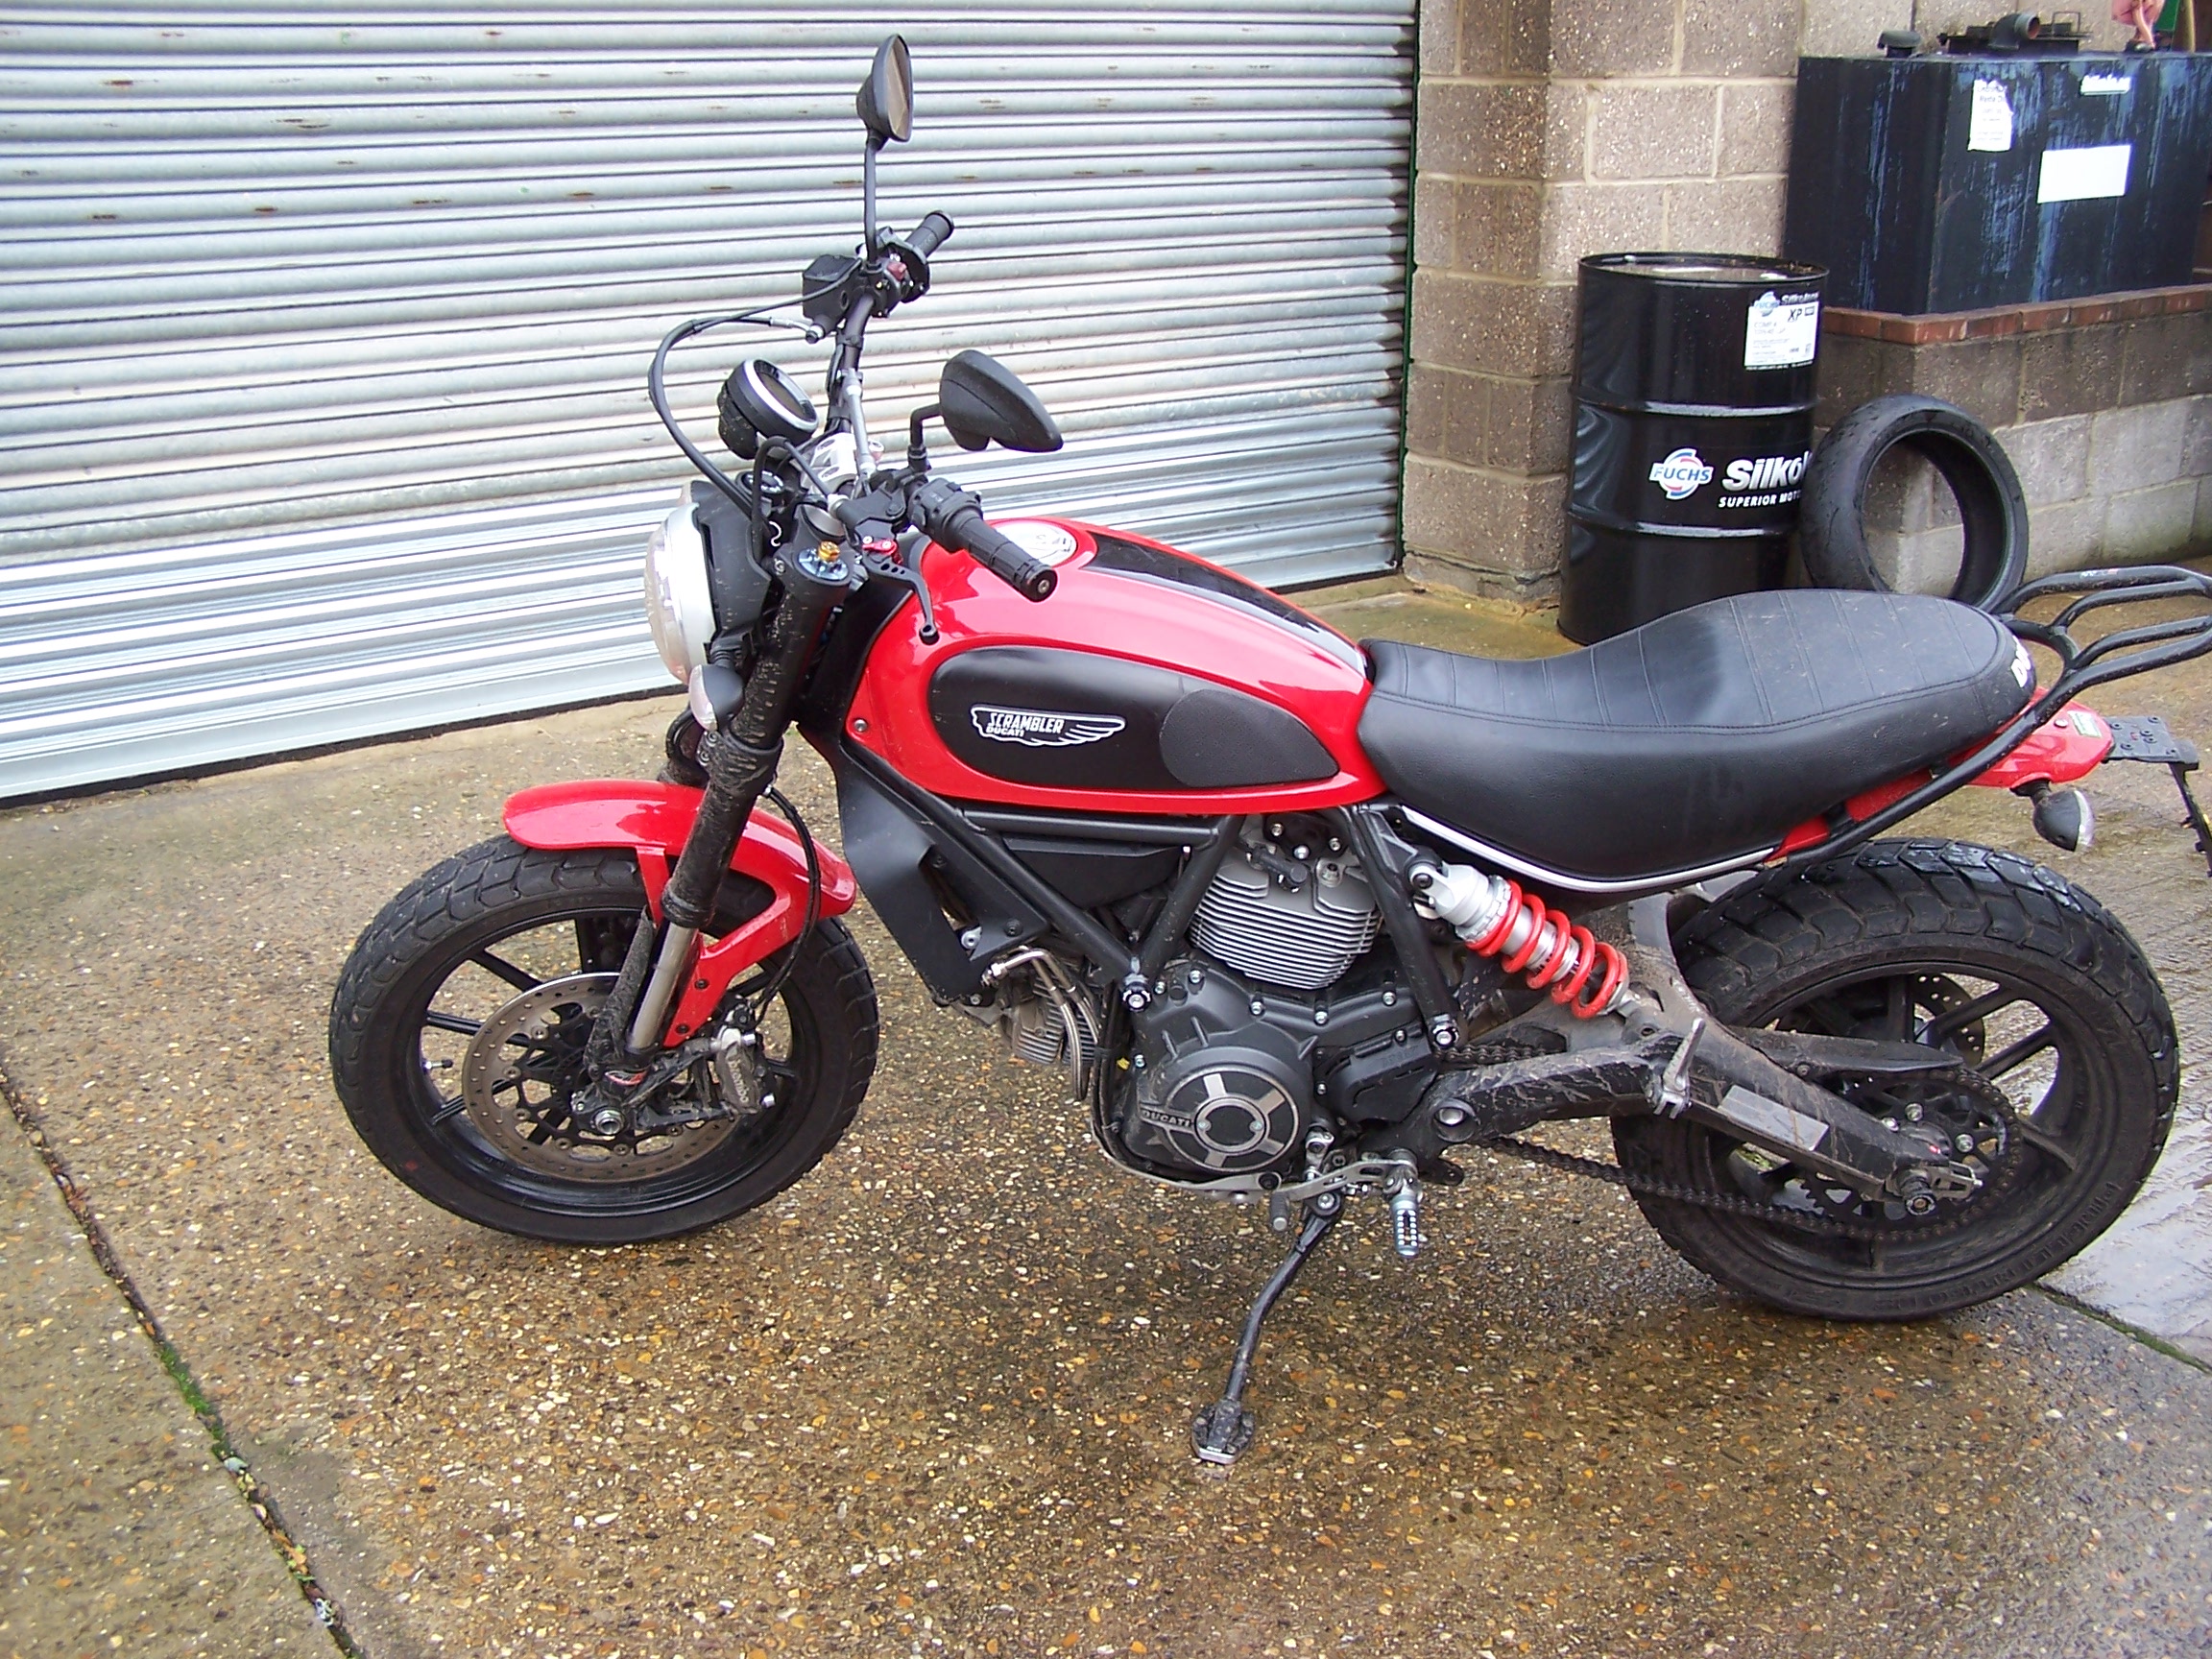 Ducati Scrambler ECU remap – an owner emails his thoughts…